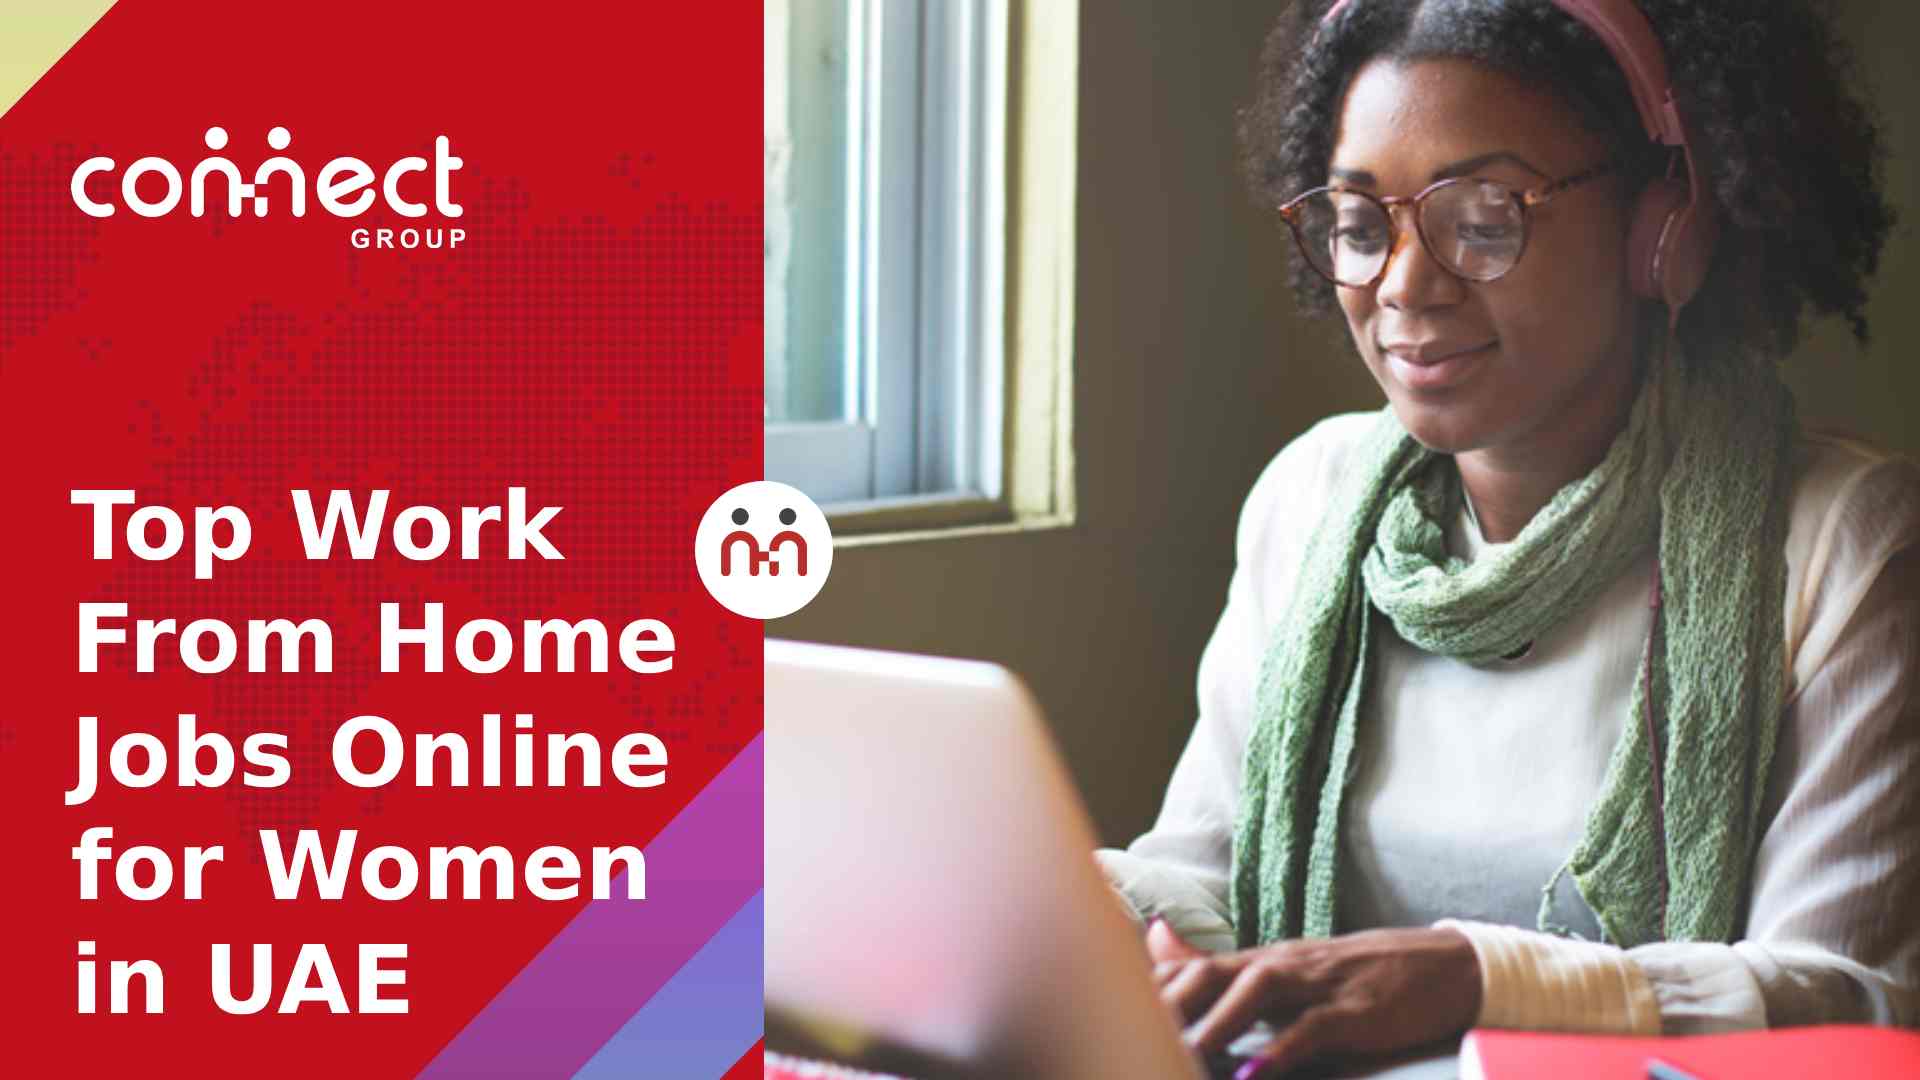 Top Work From Home Jobs Online for Women in UAE